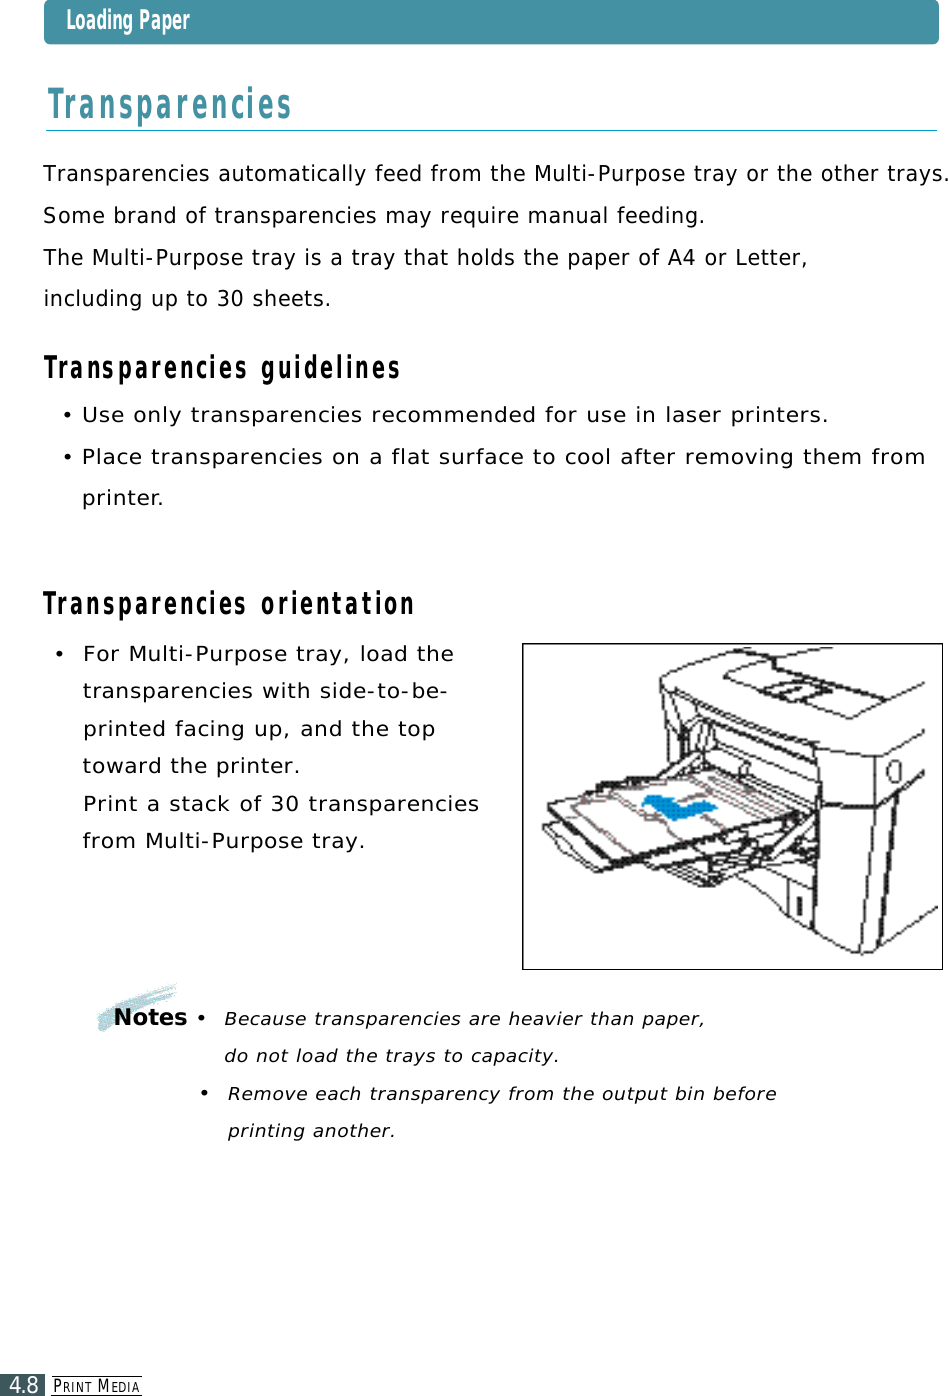 PR I N T ME D I A4.8•  For Multi-Purpose tray, load the t ransparencies with side-to-be-printed facing up, and the topt o ward the printer. Print a stack of 30 tra n s p a r e n c i e sfrom Multi-Purpose tray.Transparencies automatically feed from the Multi-Purpose tray or the other trays. Some brand of transparencies may require manual feeding.The Multi-Purpose tray is a tray that holds the paper of A4 or Letter, including up to 30 sheets.Transparencies guidelines• Use only transparencies recommended for use in laser printers.• Place transparencies on a flat surface to cool after removing them fromp r i n t e r.Transparencies orientationTr a n s p a r e n c i e sNotes•  Because transparencies are heavier than paper, do not load the trays to capacity.•  Remove each transparency from the output bin before printing another.Loading Paper